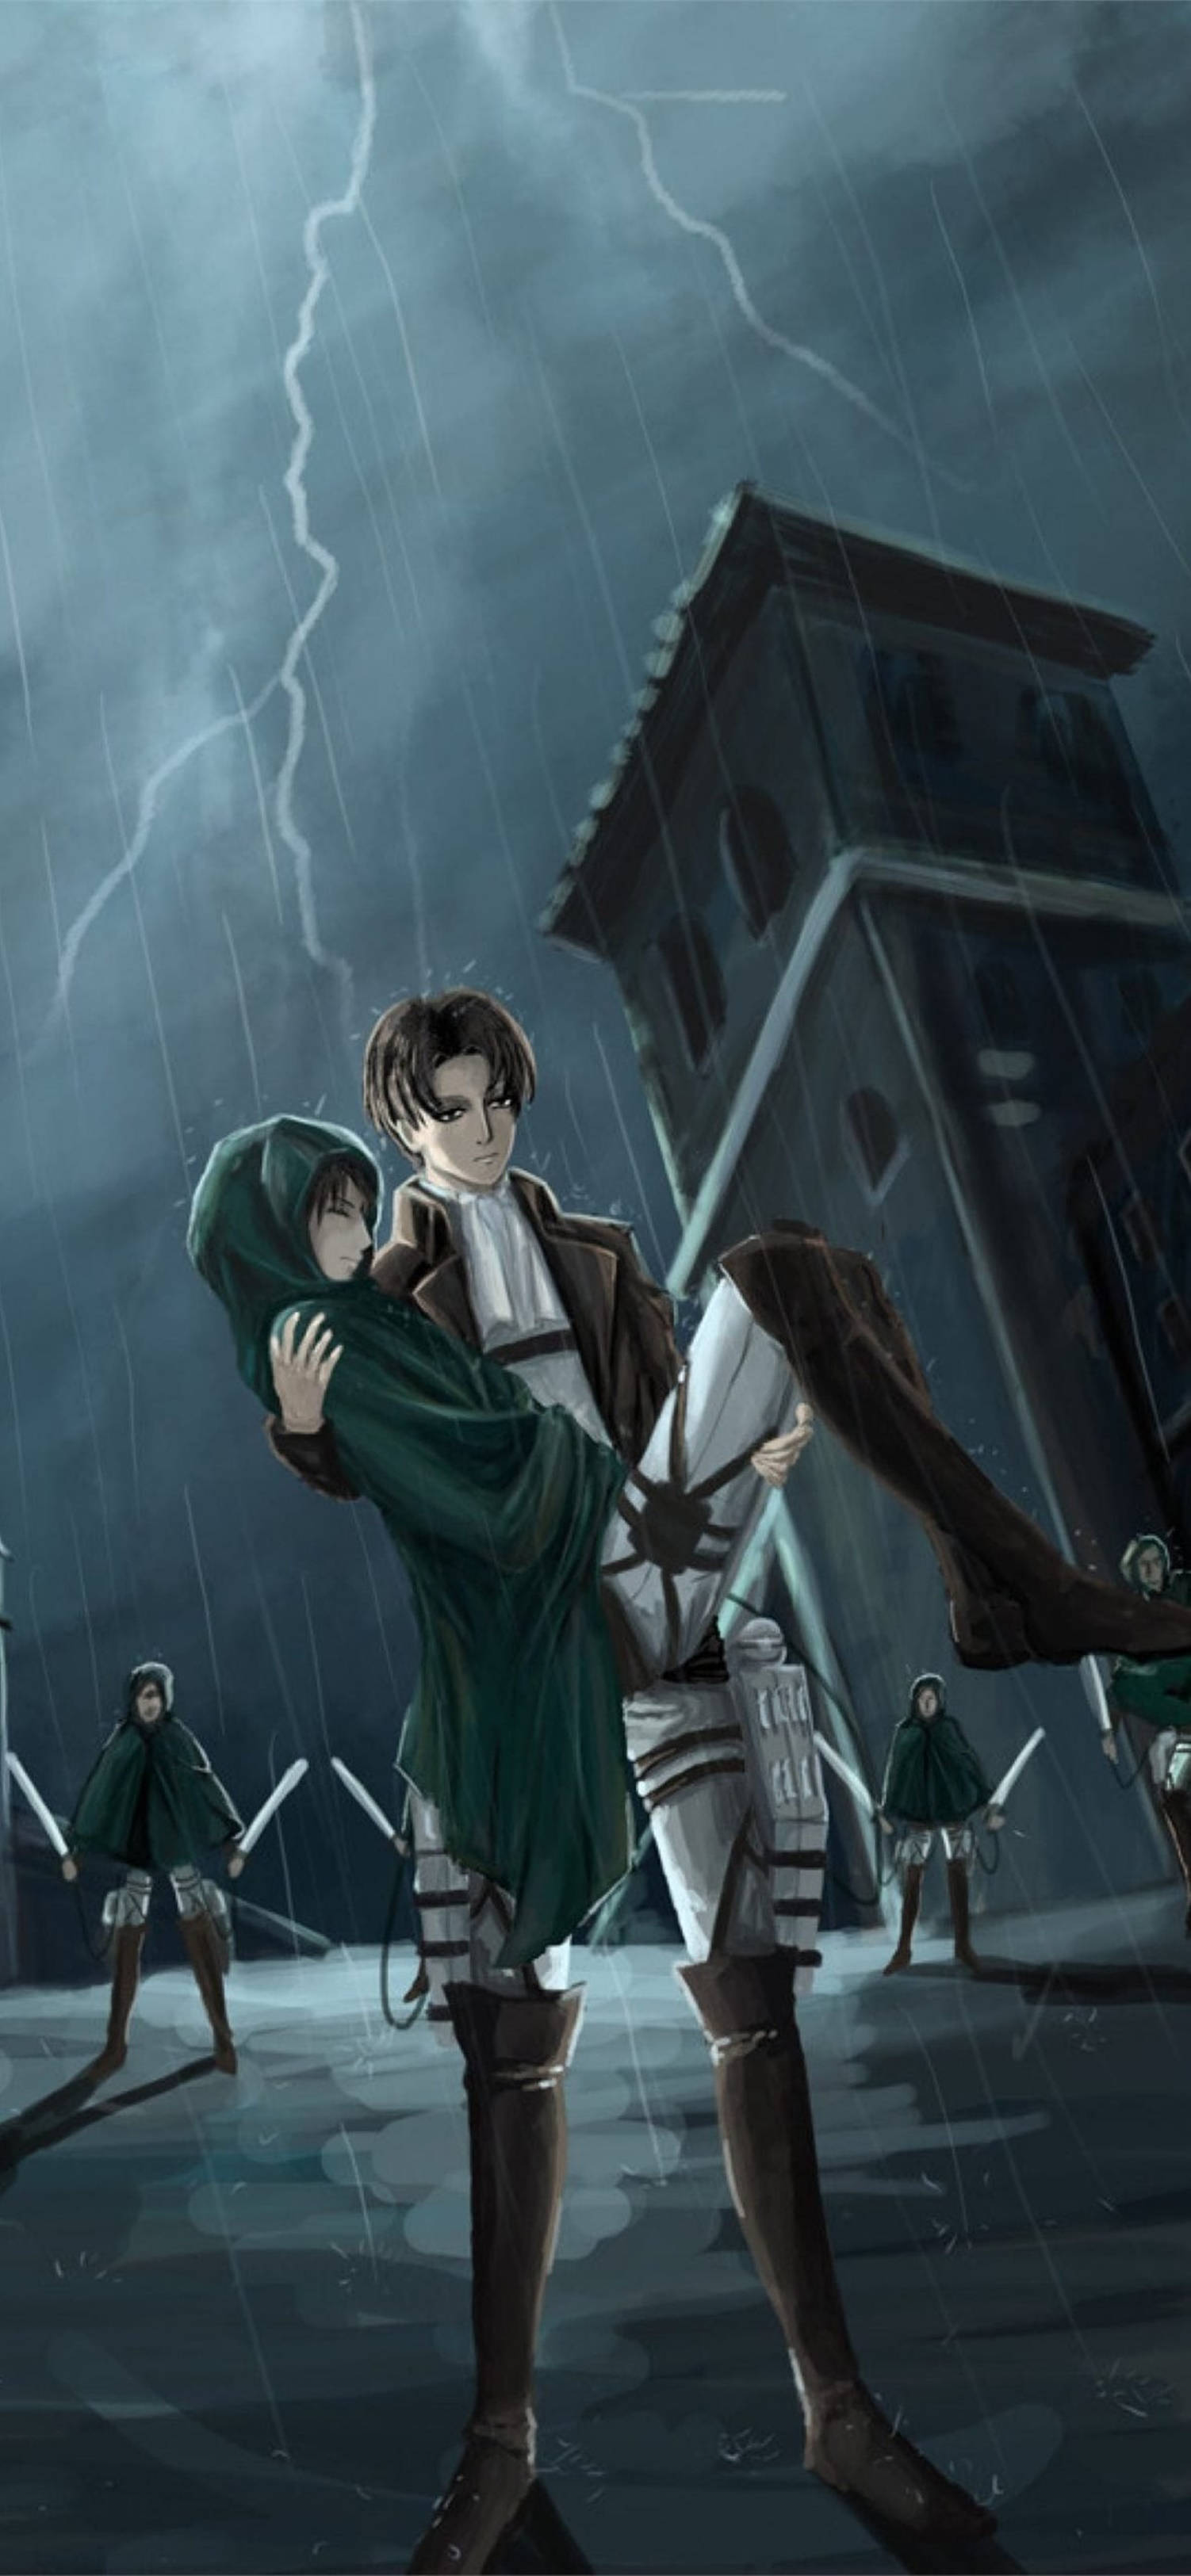 Titan Battles In High Definition: Levi And Mikasa Ackerman In Action In Aot 4k Wallpaper